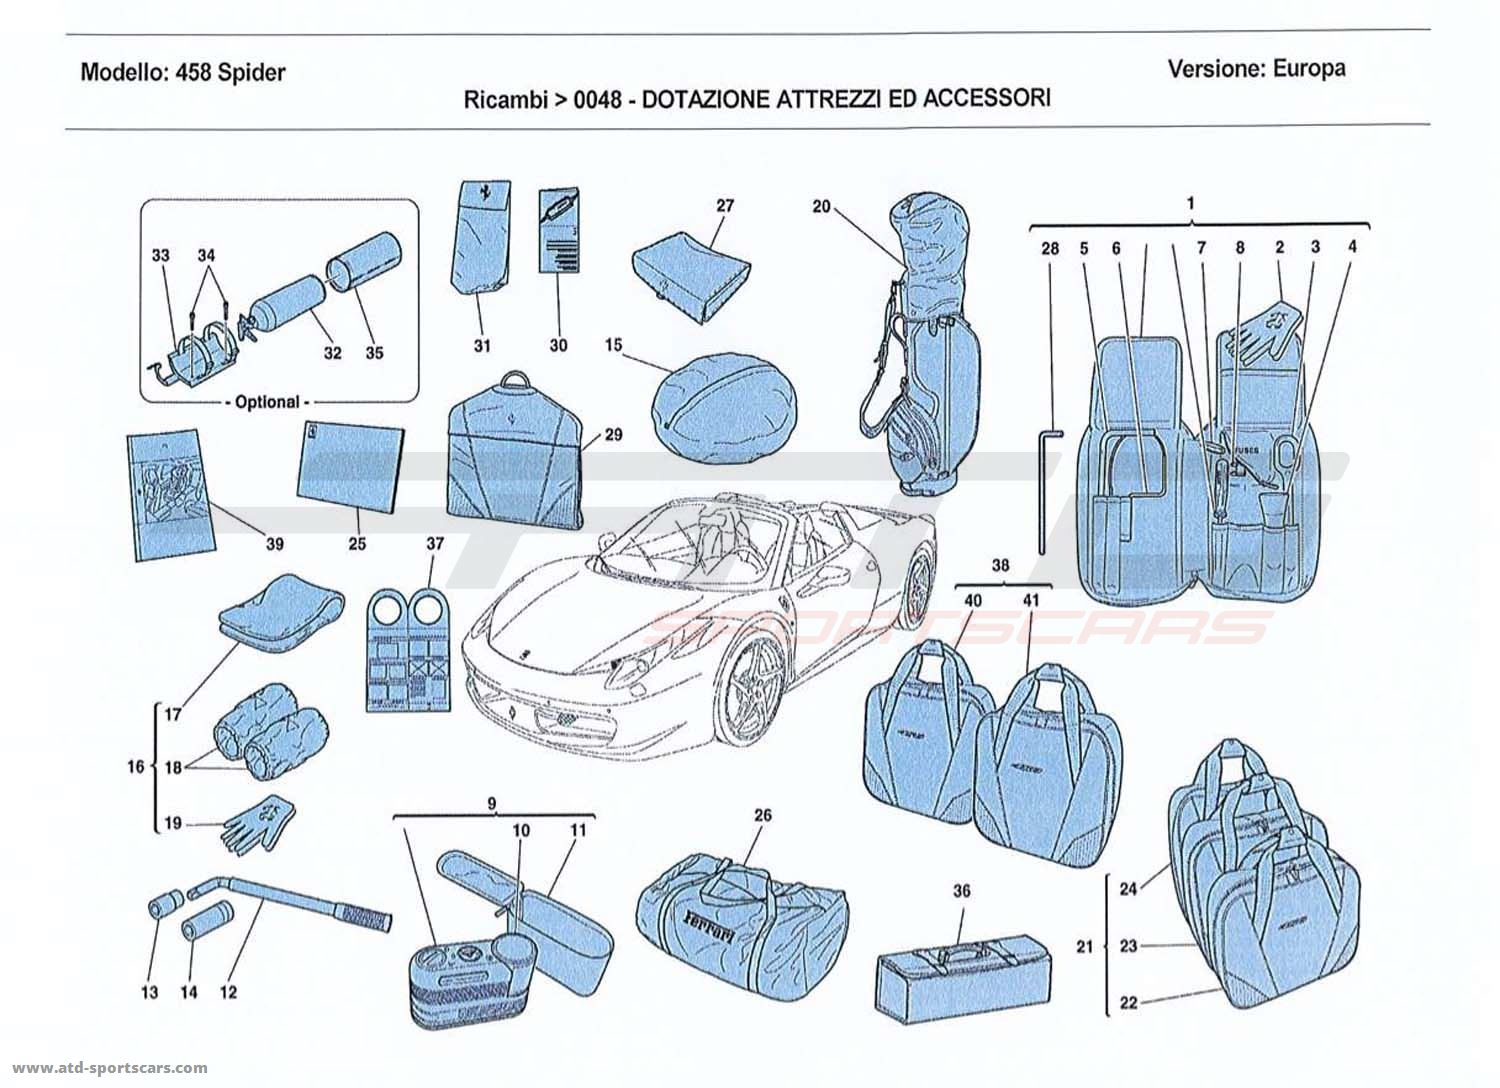 TOOLS AND ACCESSORIES PROVIDED WITH VEHICLE